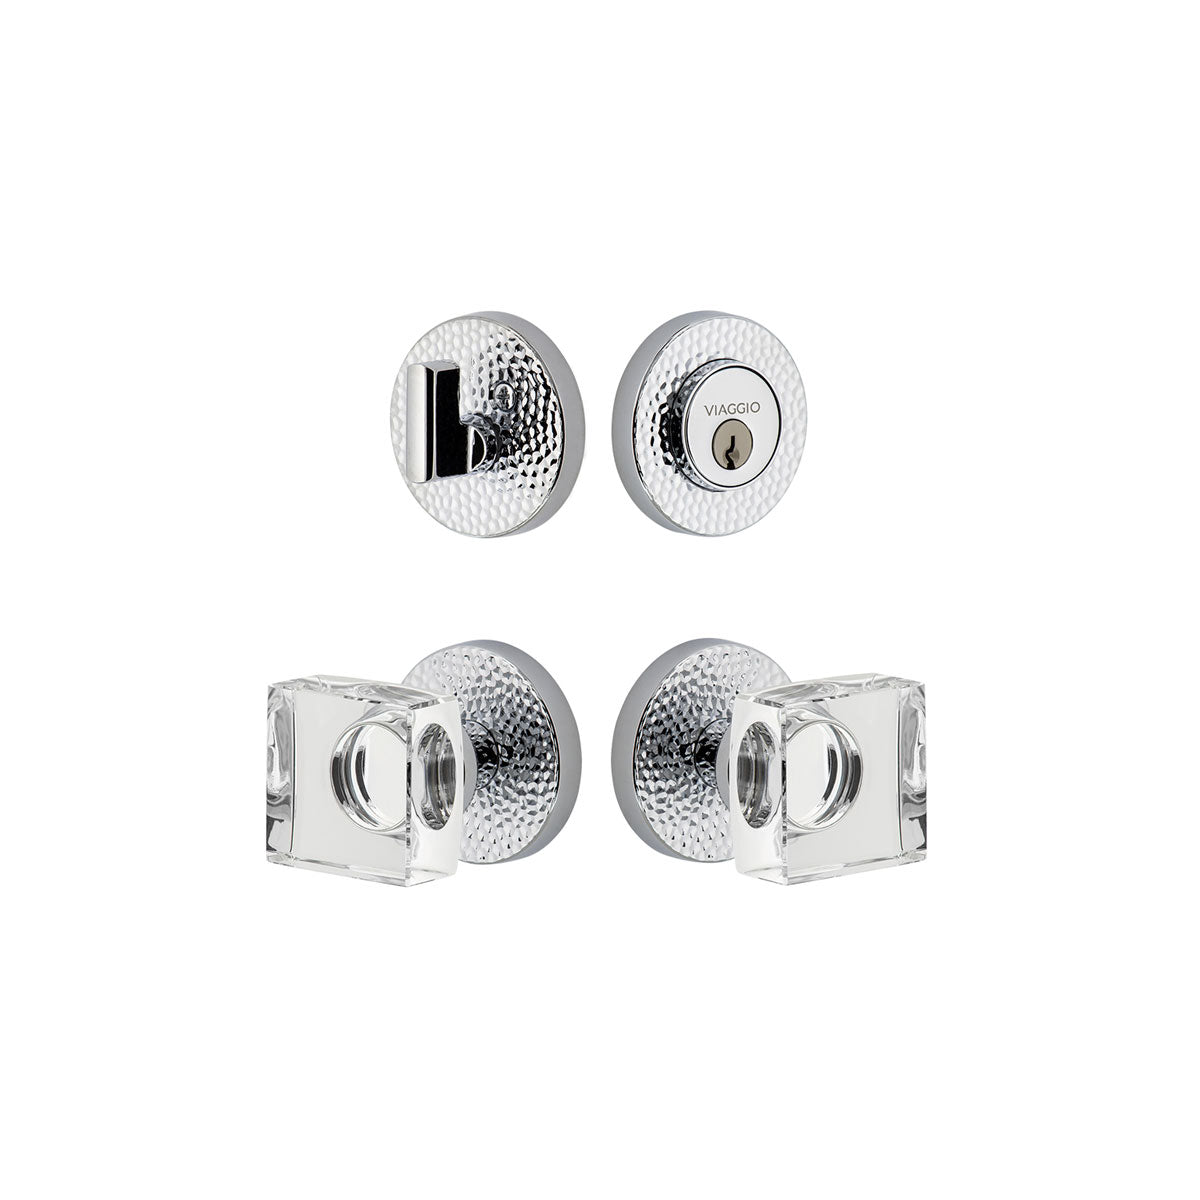 Circolo Hammered Rosette Entry Set with Quadrato Crystal Knob in Bright Chrome